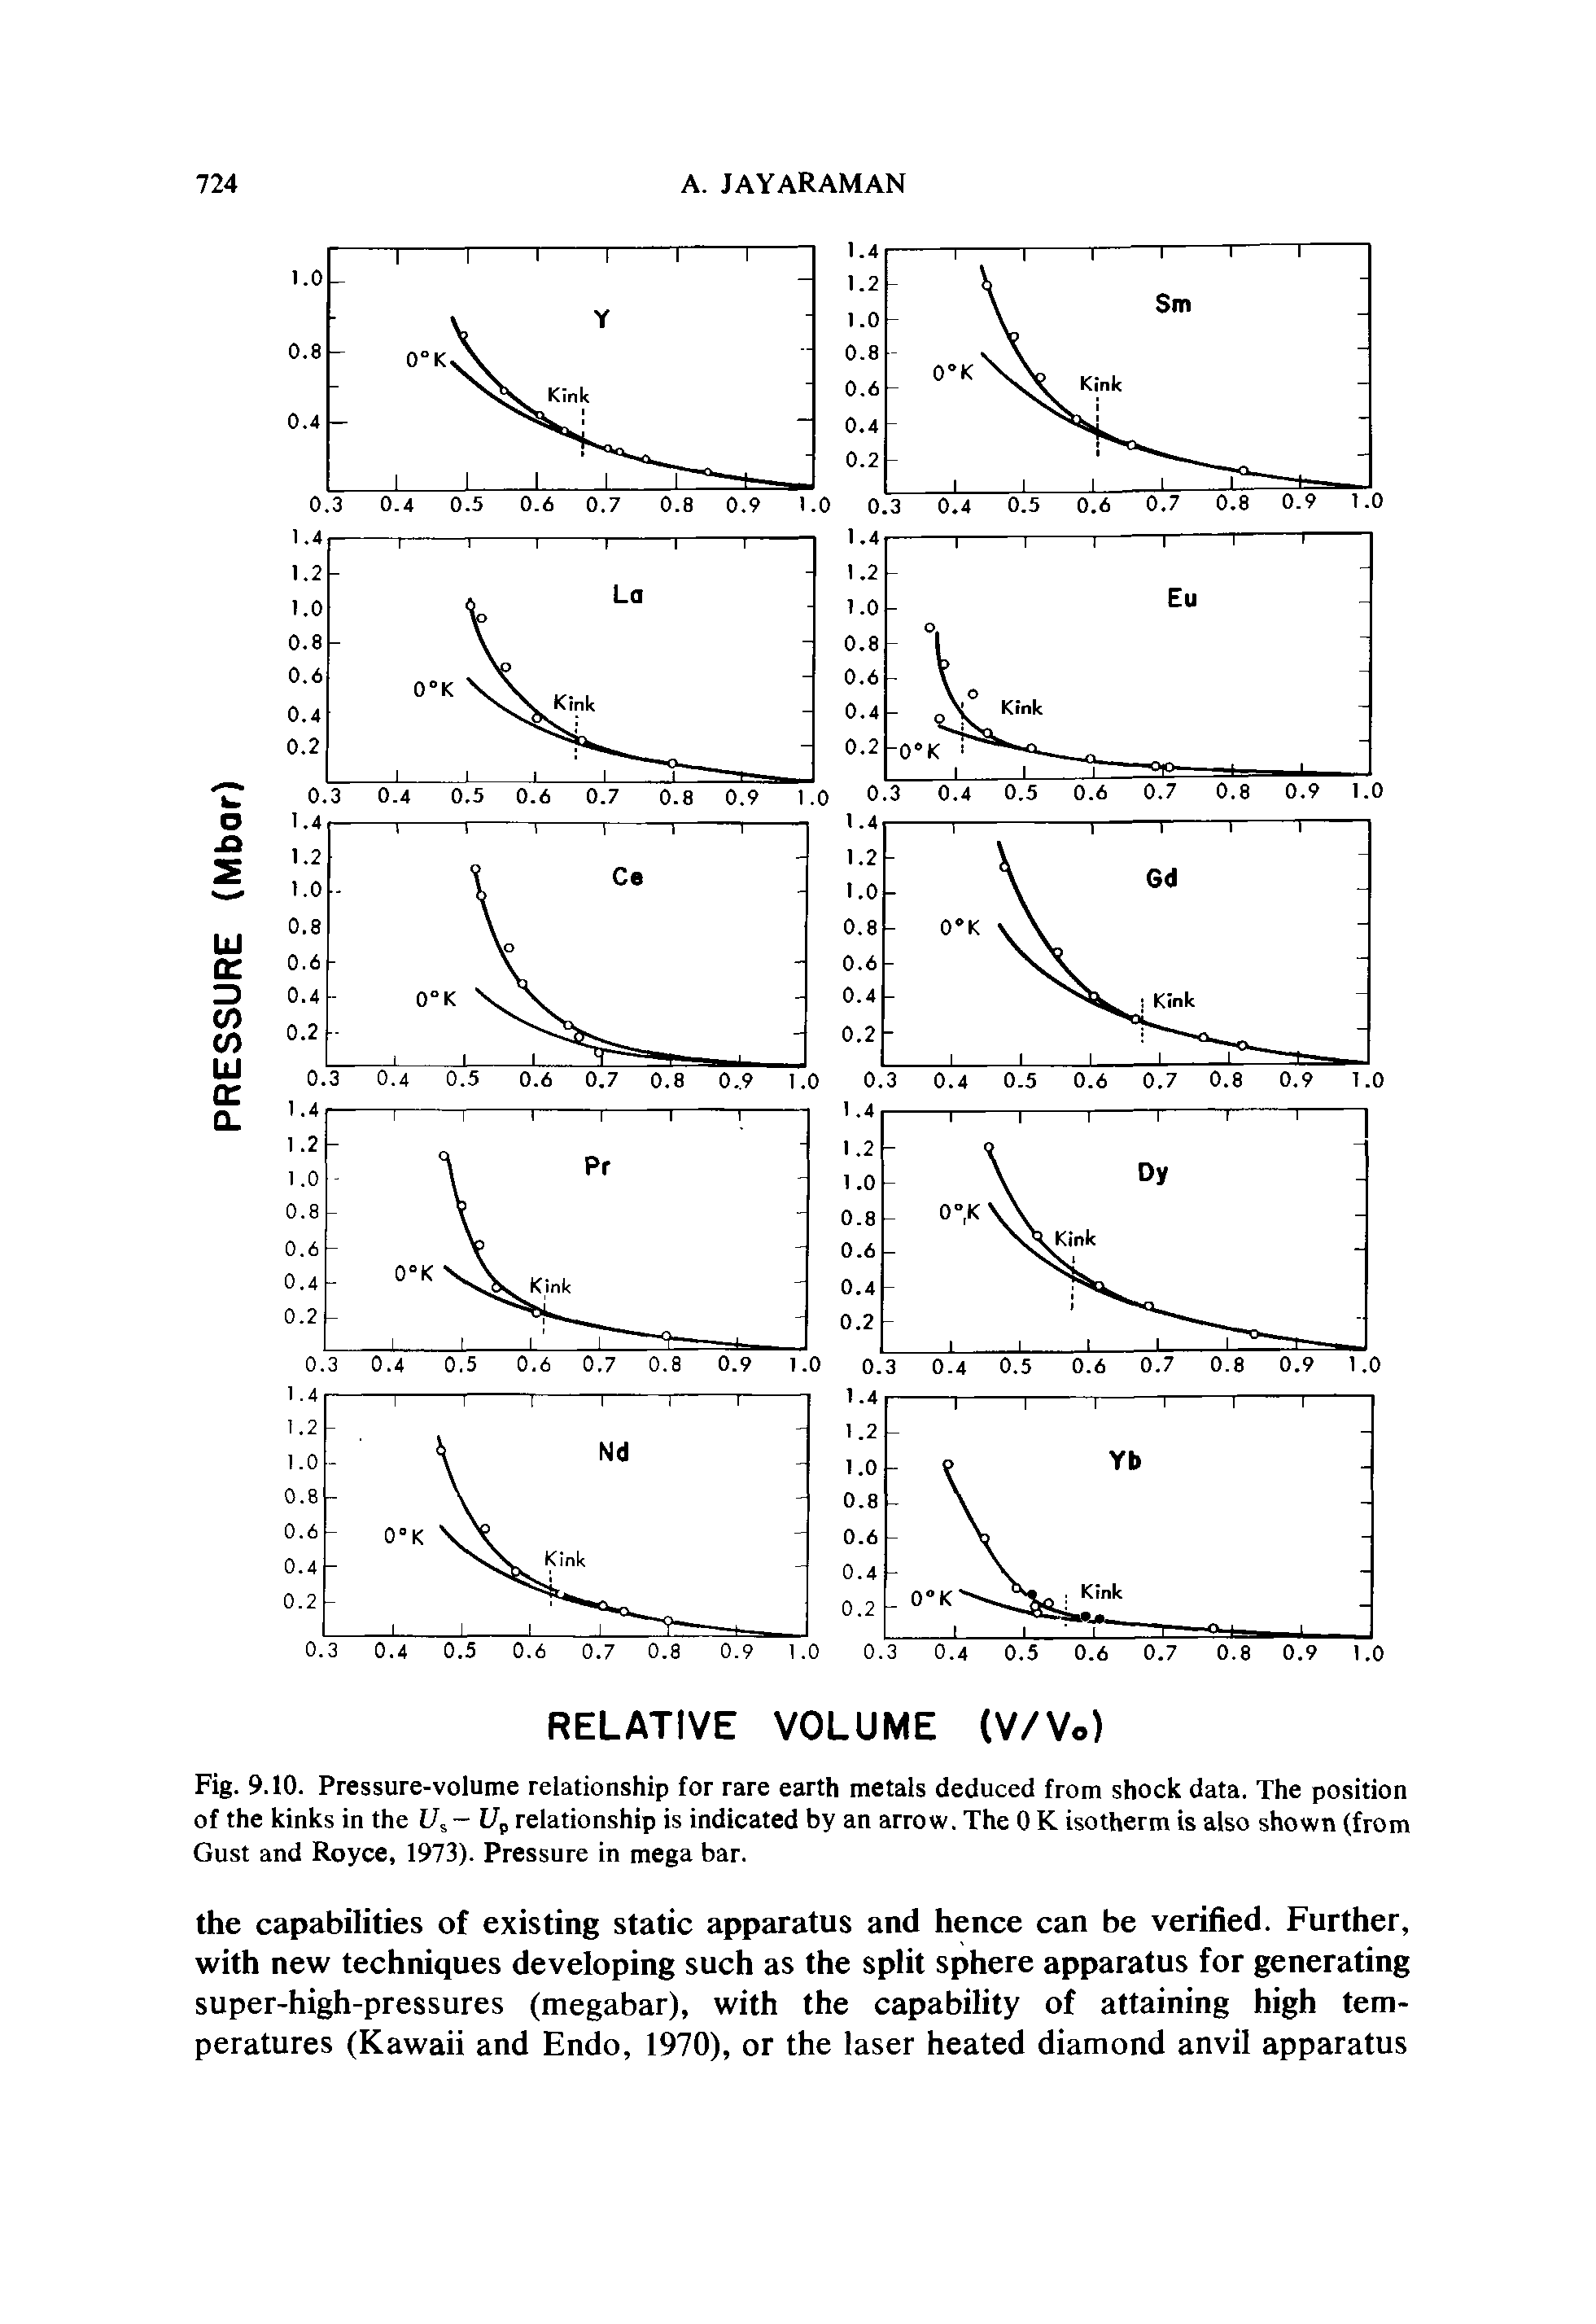 Fig. 9.10. Pressure-volume relationship for rare earth metals deduced from shock data. The position of the kinks in the 17, - I7p relationship is indicated by an arrow. The 0 K isotherm is also shown (from Gust and Royce, 1973). Pressure in mega bar.